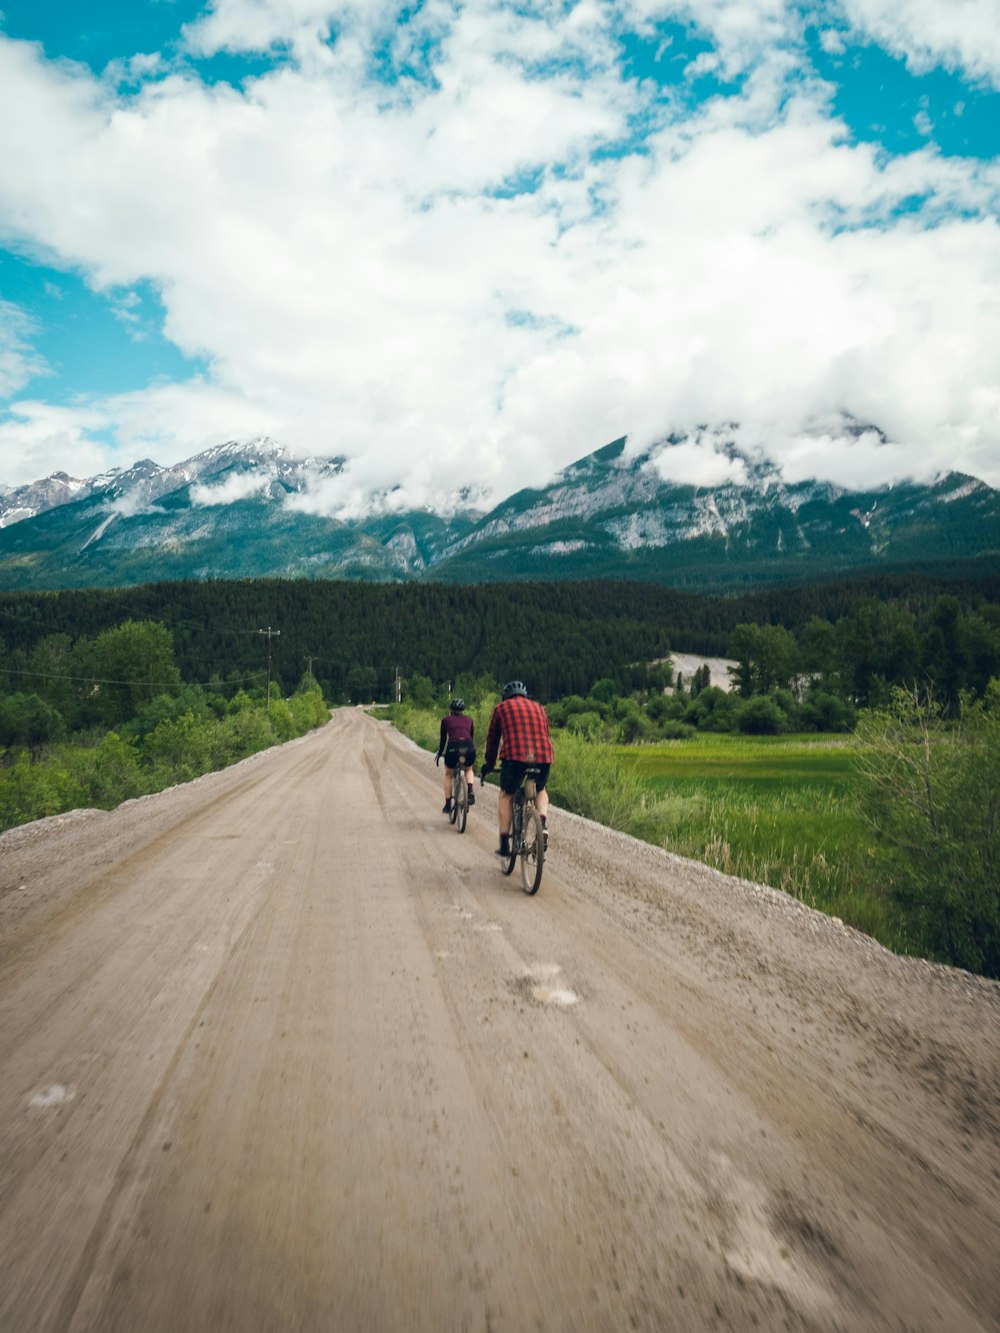 a couple of people riding bikes on a dirt road with mountains in the background